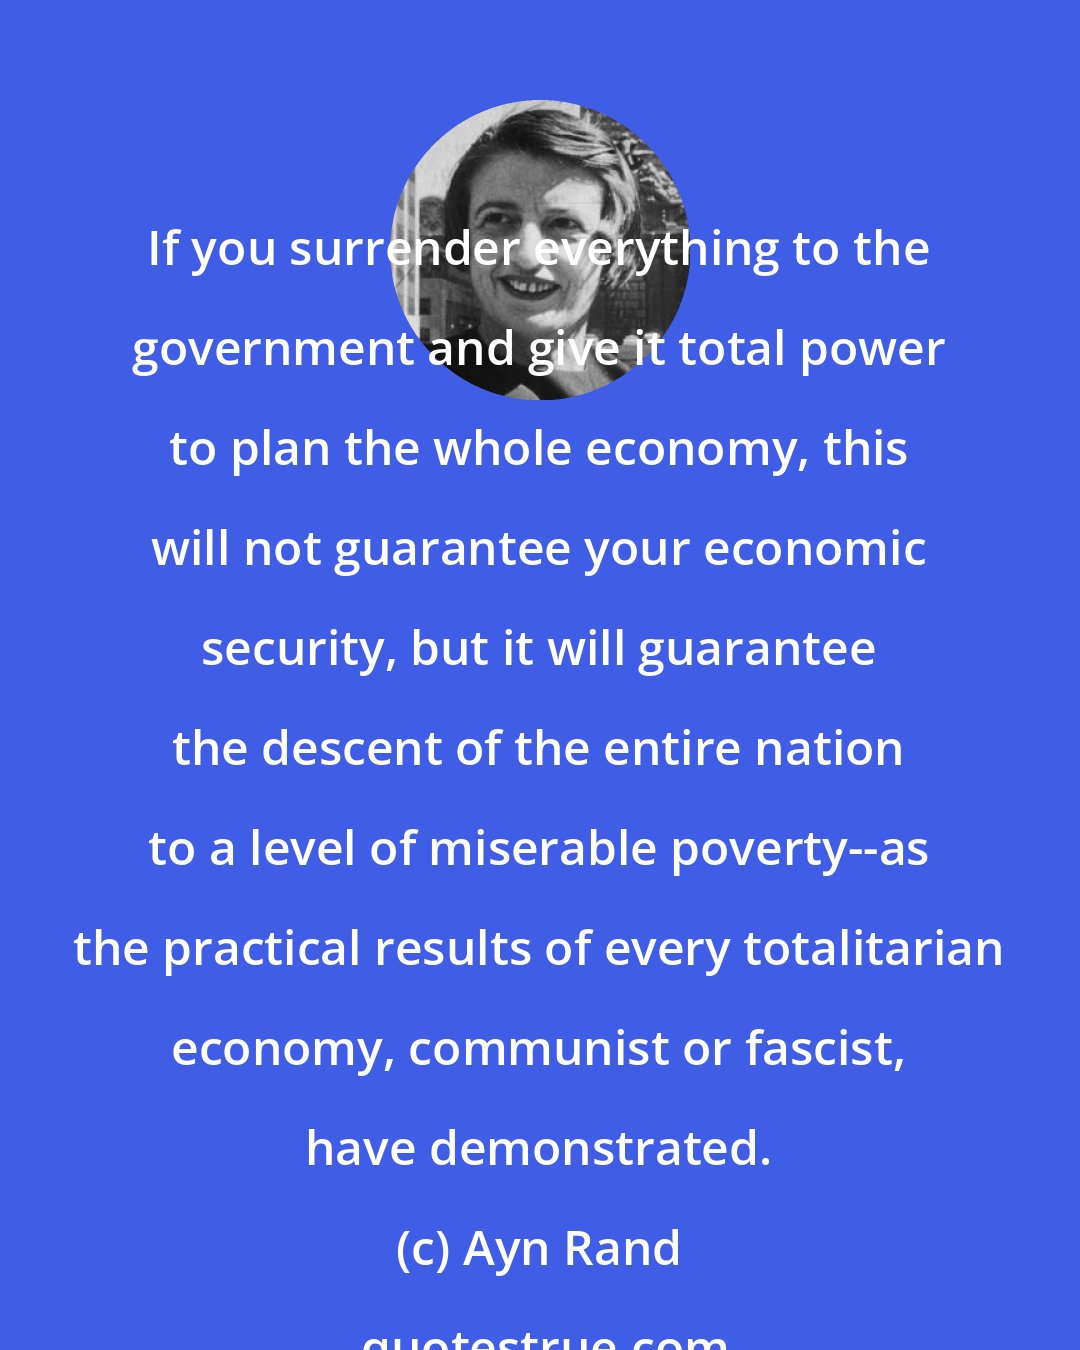 Ayn Rand: If you surrender everything to the government and give it total power to plan the whole economy, this will not guarantee your economic security, but it will guarantee the descent of the entire nation to a level of miserable poverty--as the practical results of every totalitarian economy, communist or fascist, have demonstrated.